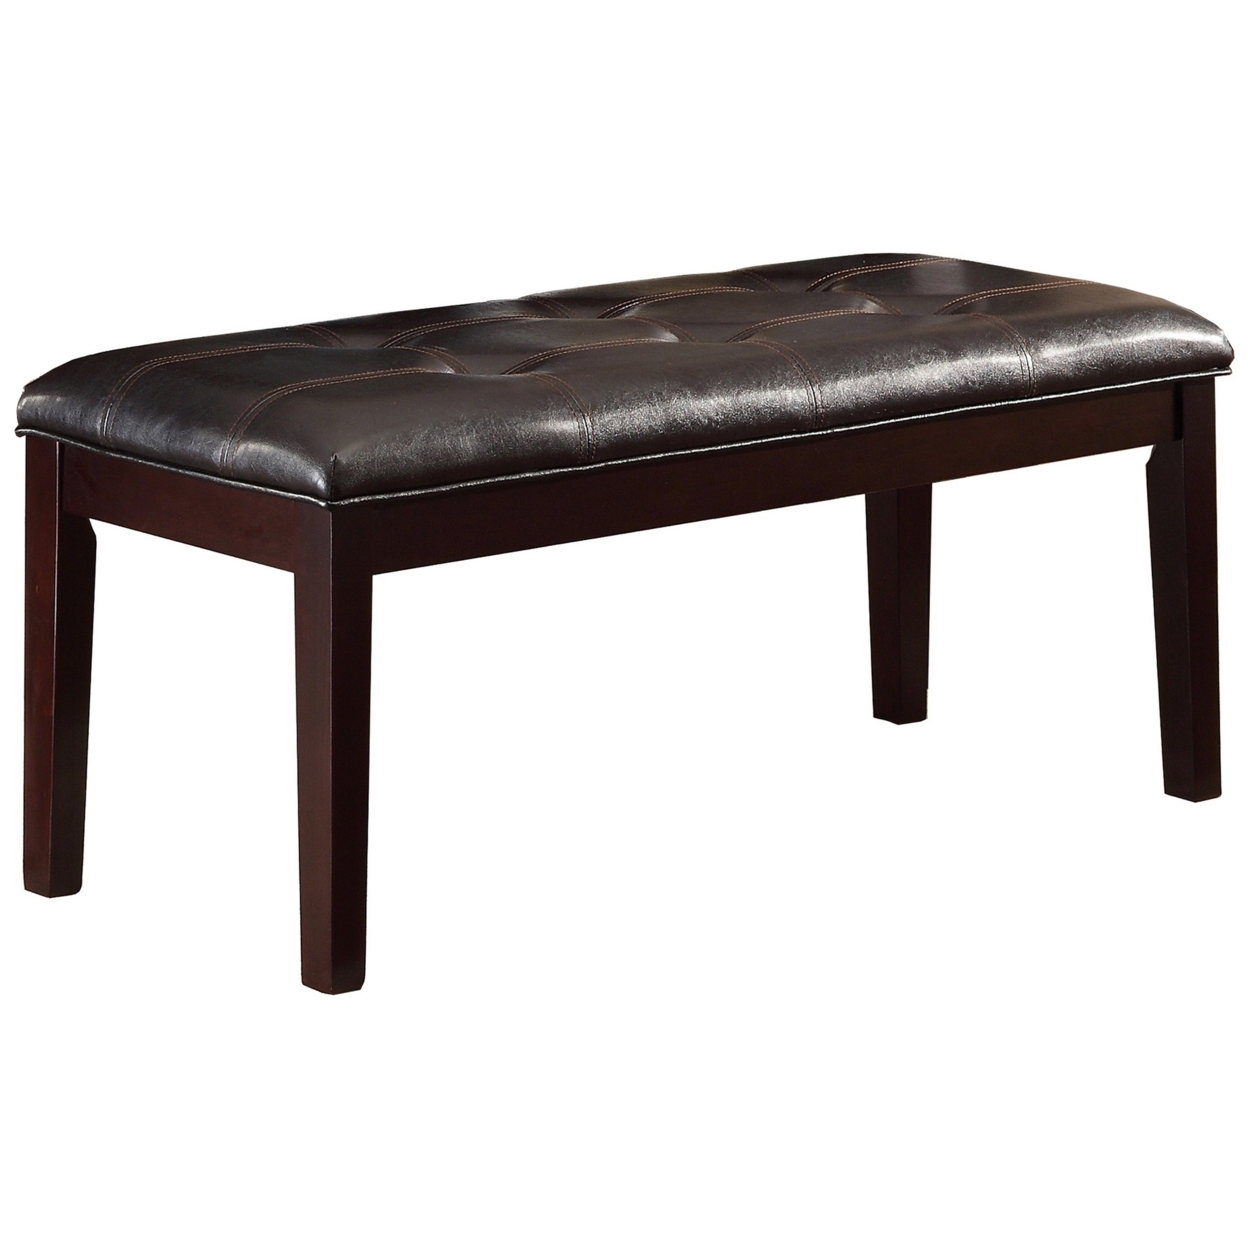 Button Tufted Faux Leather Upholstered Wooden Bench, Espresso Brown- Saltoro Sherpi